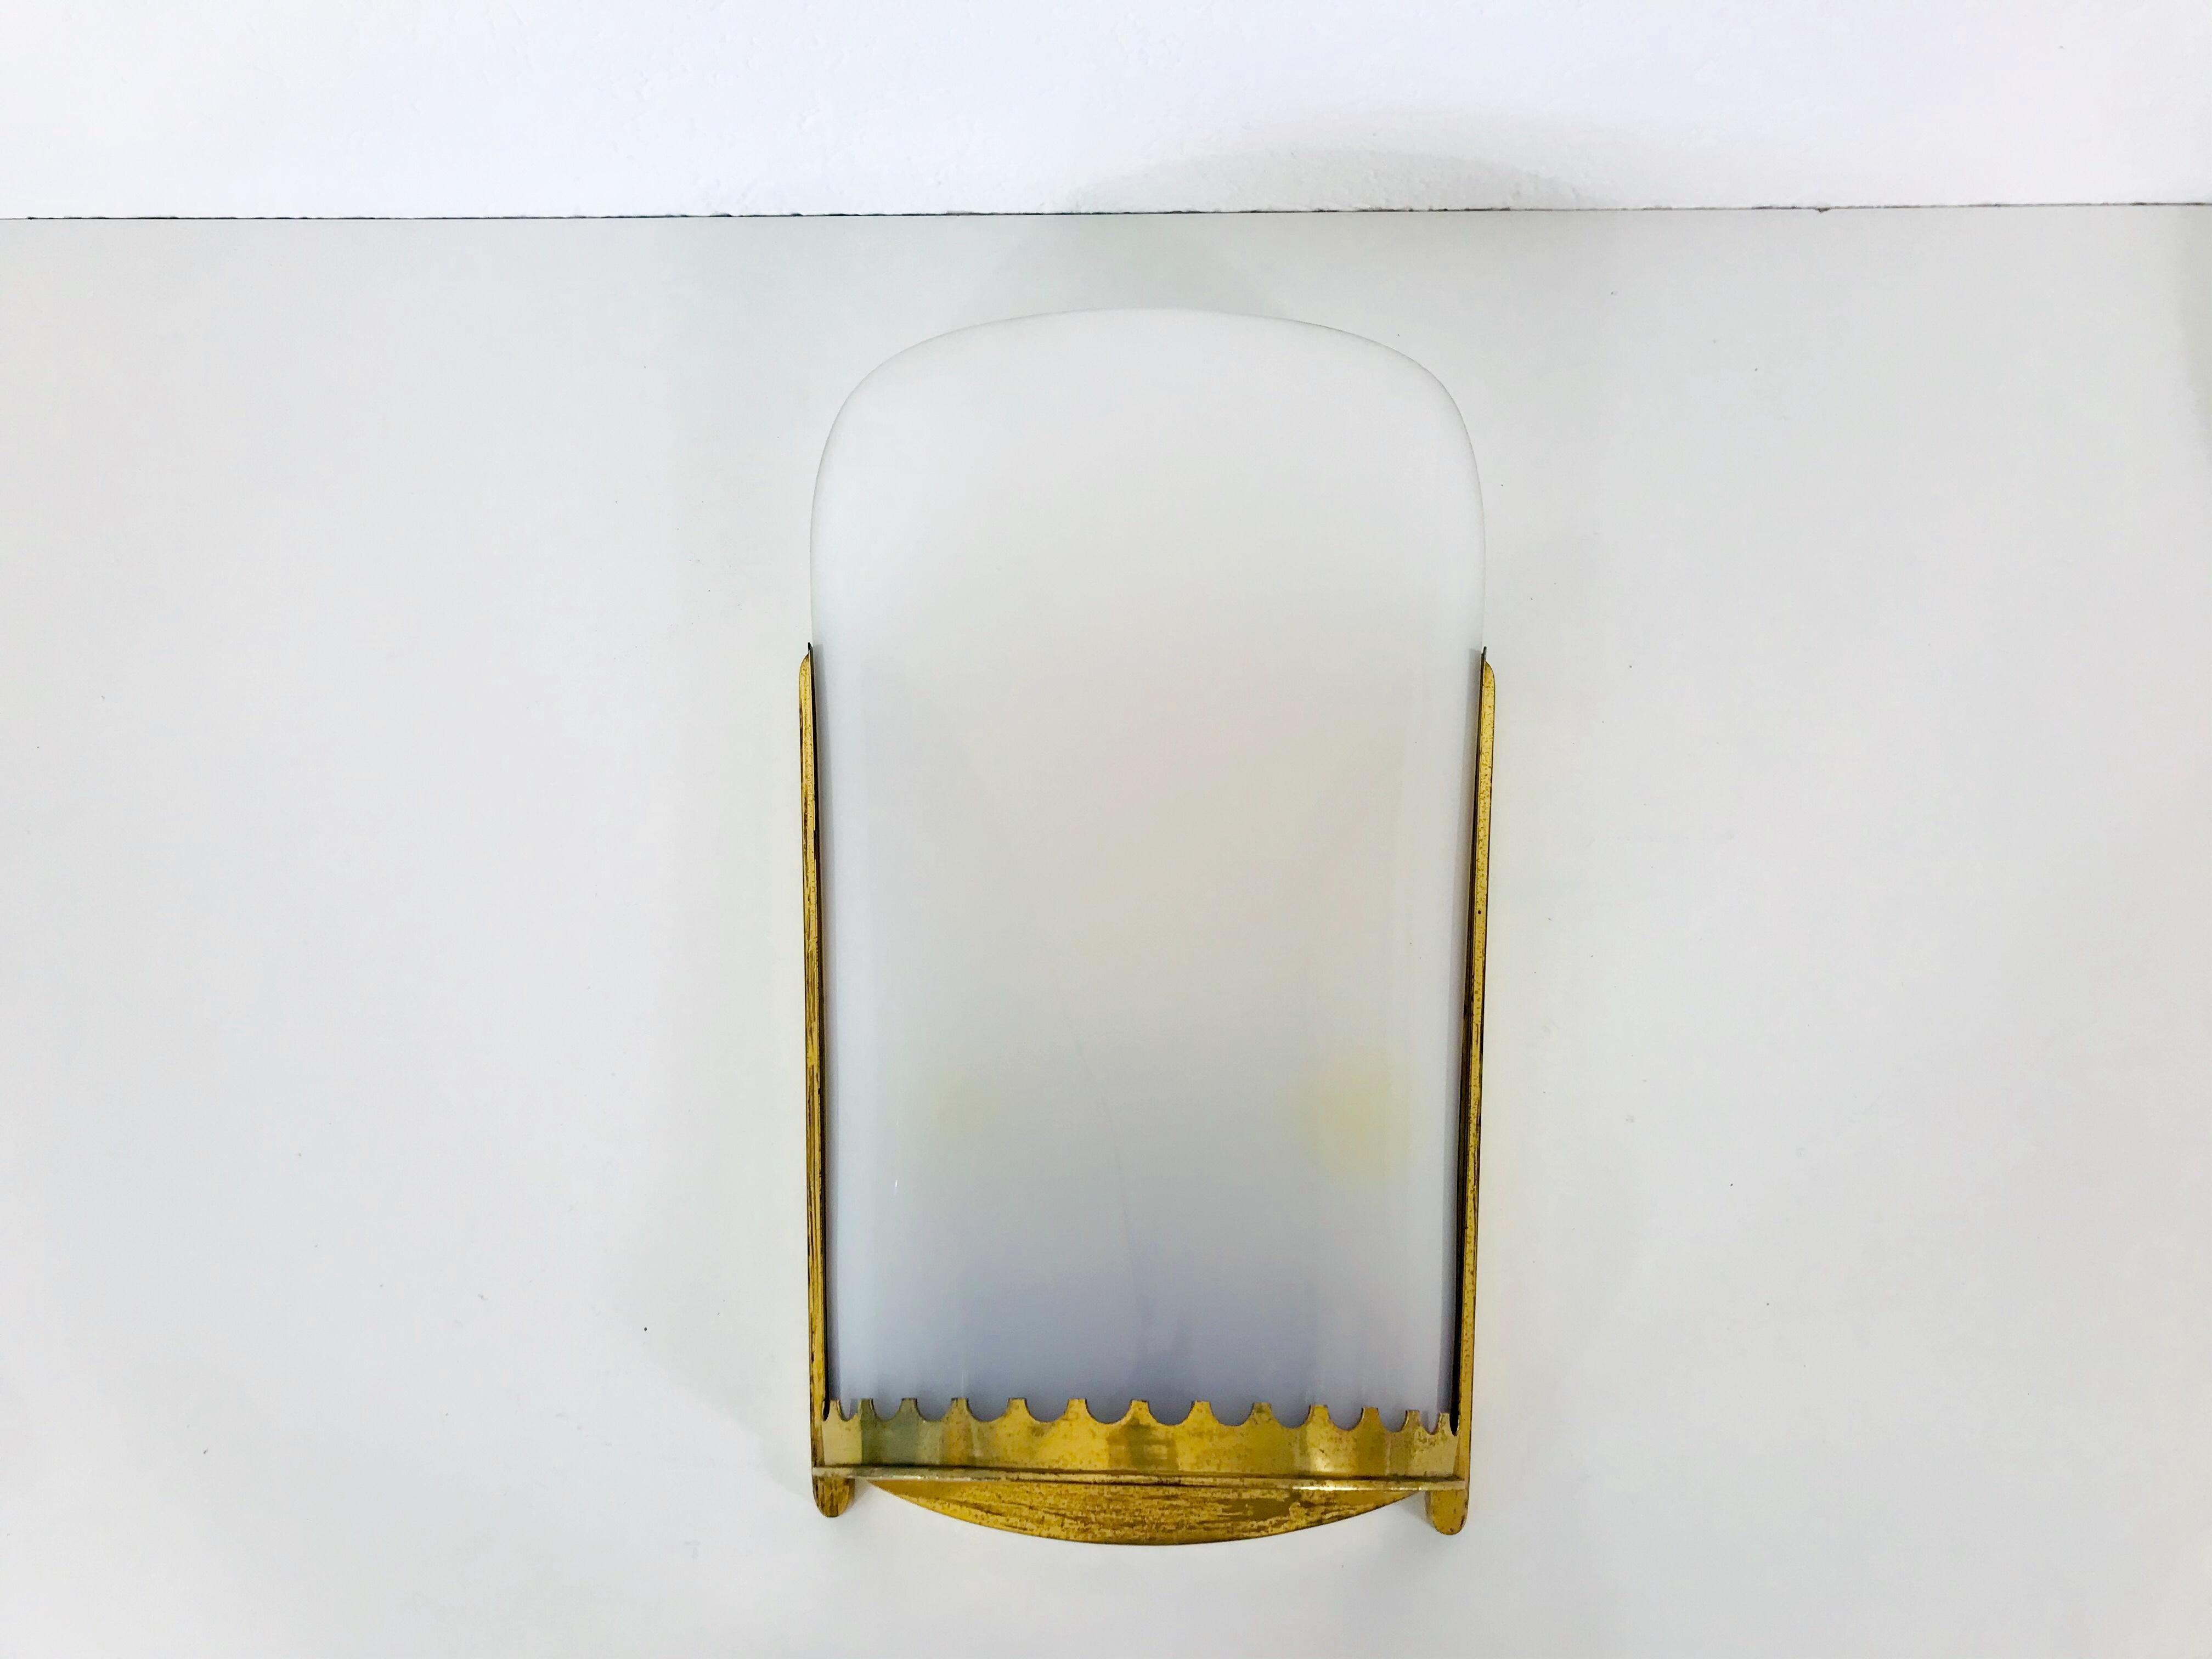 Huge Pair of Mid-Century Modern Brass and Perspex Cinema Wall Lamps, 1950s For Sale 4